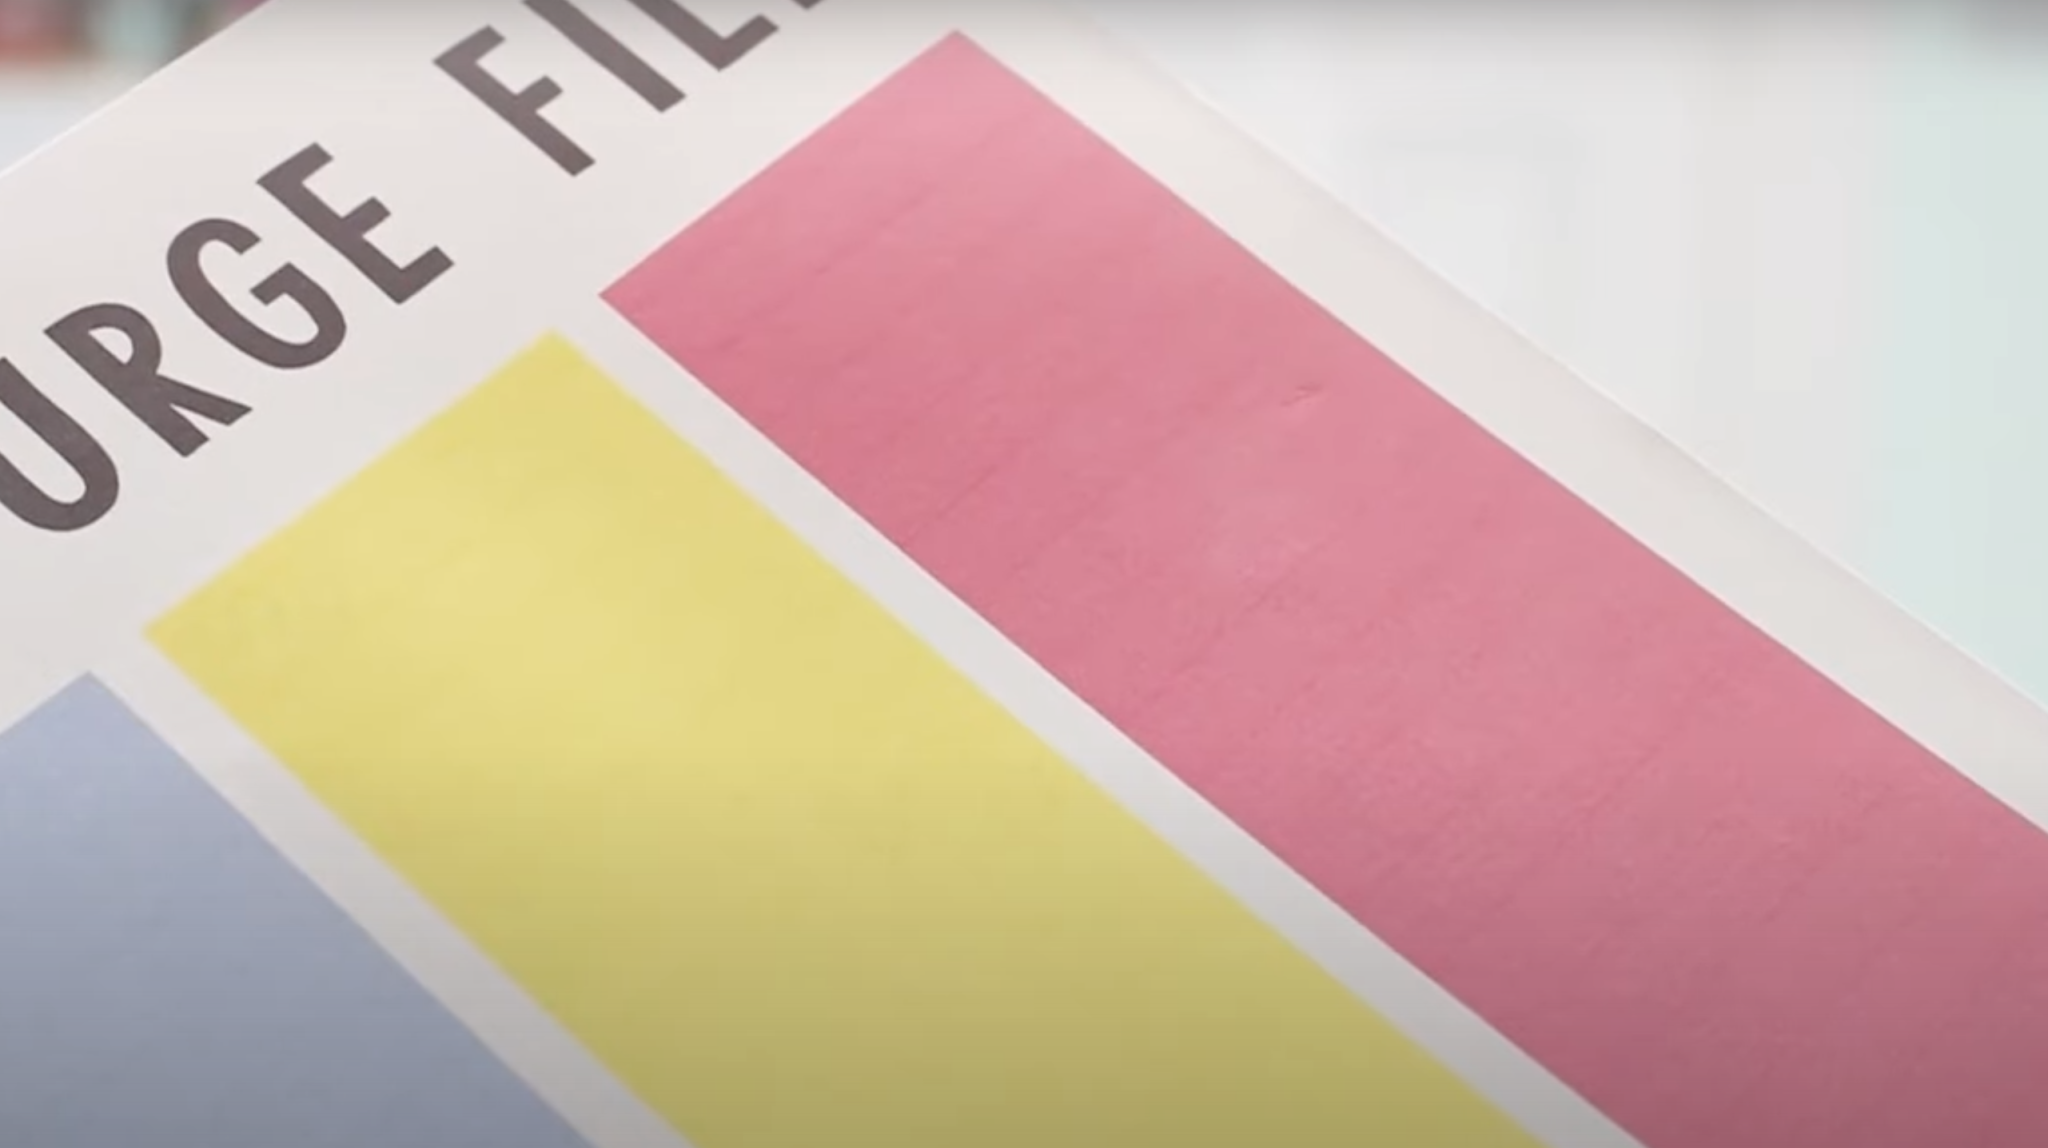 Print has lines in color sections.